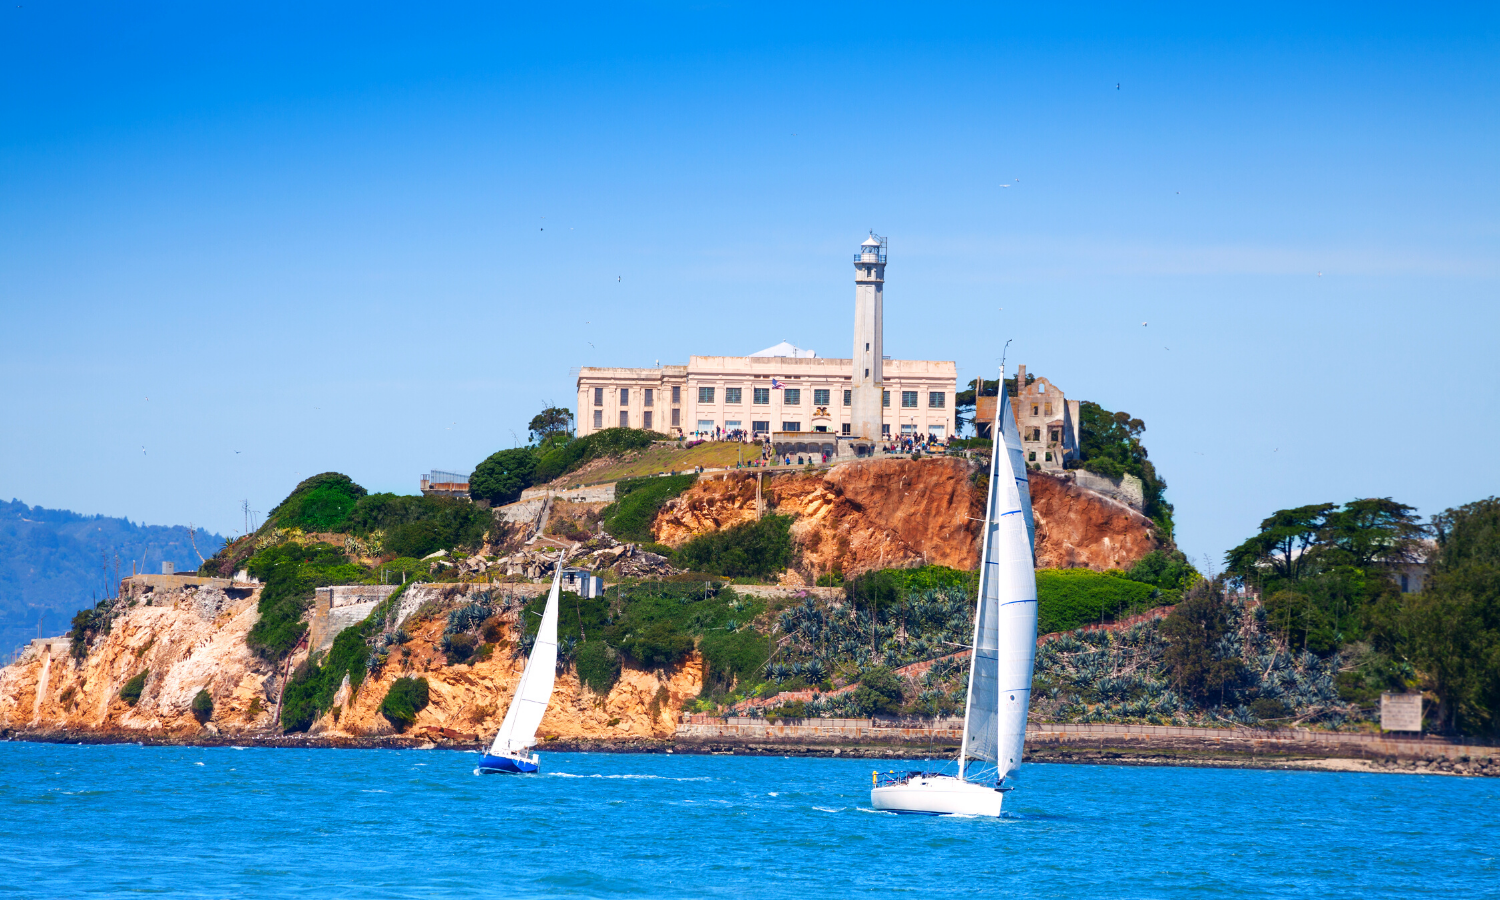 Picture of Alcatraz Island with some Yachts sailing in front. 